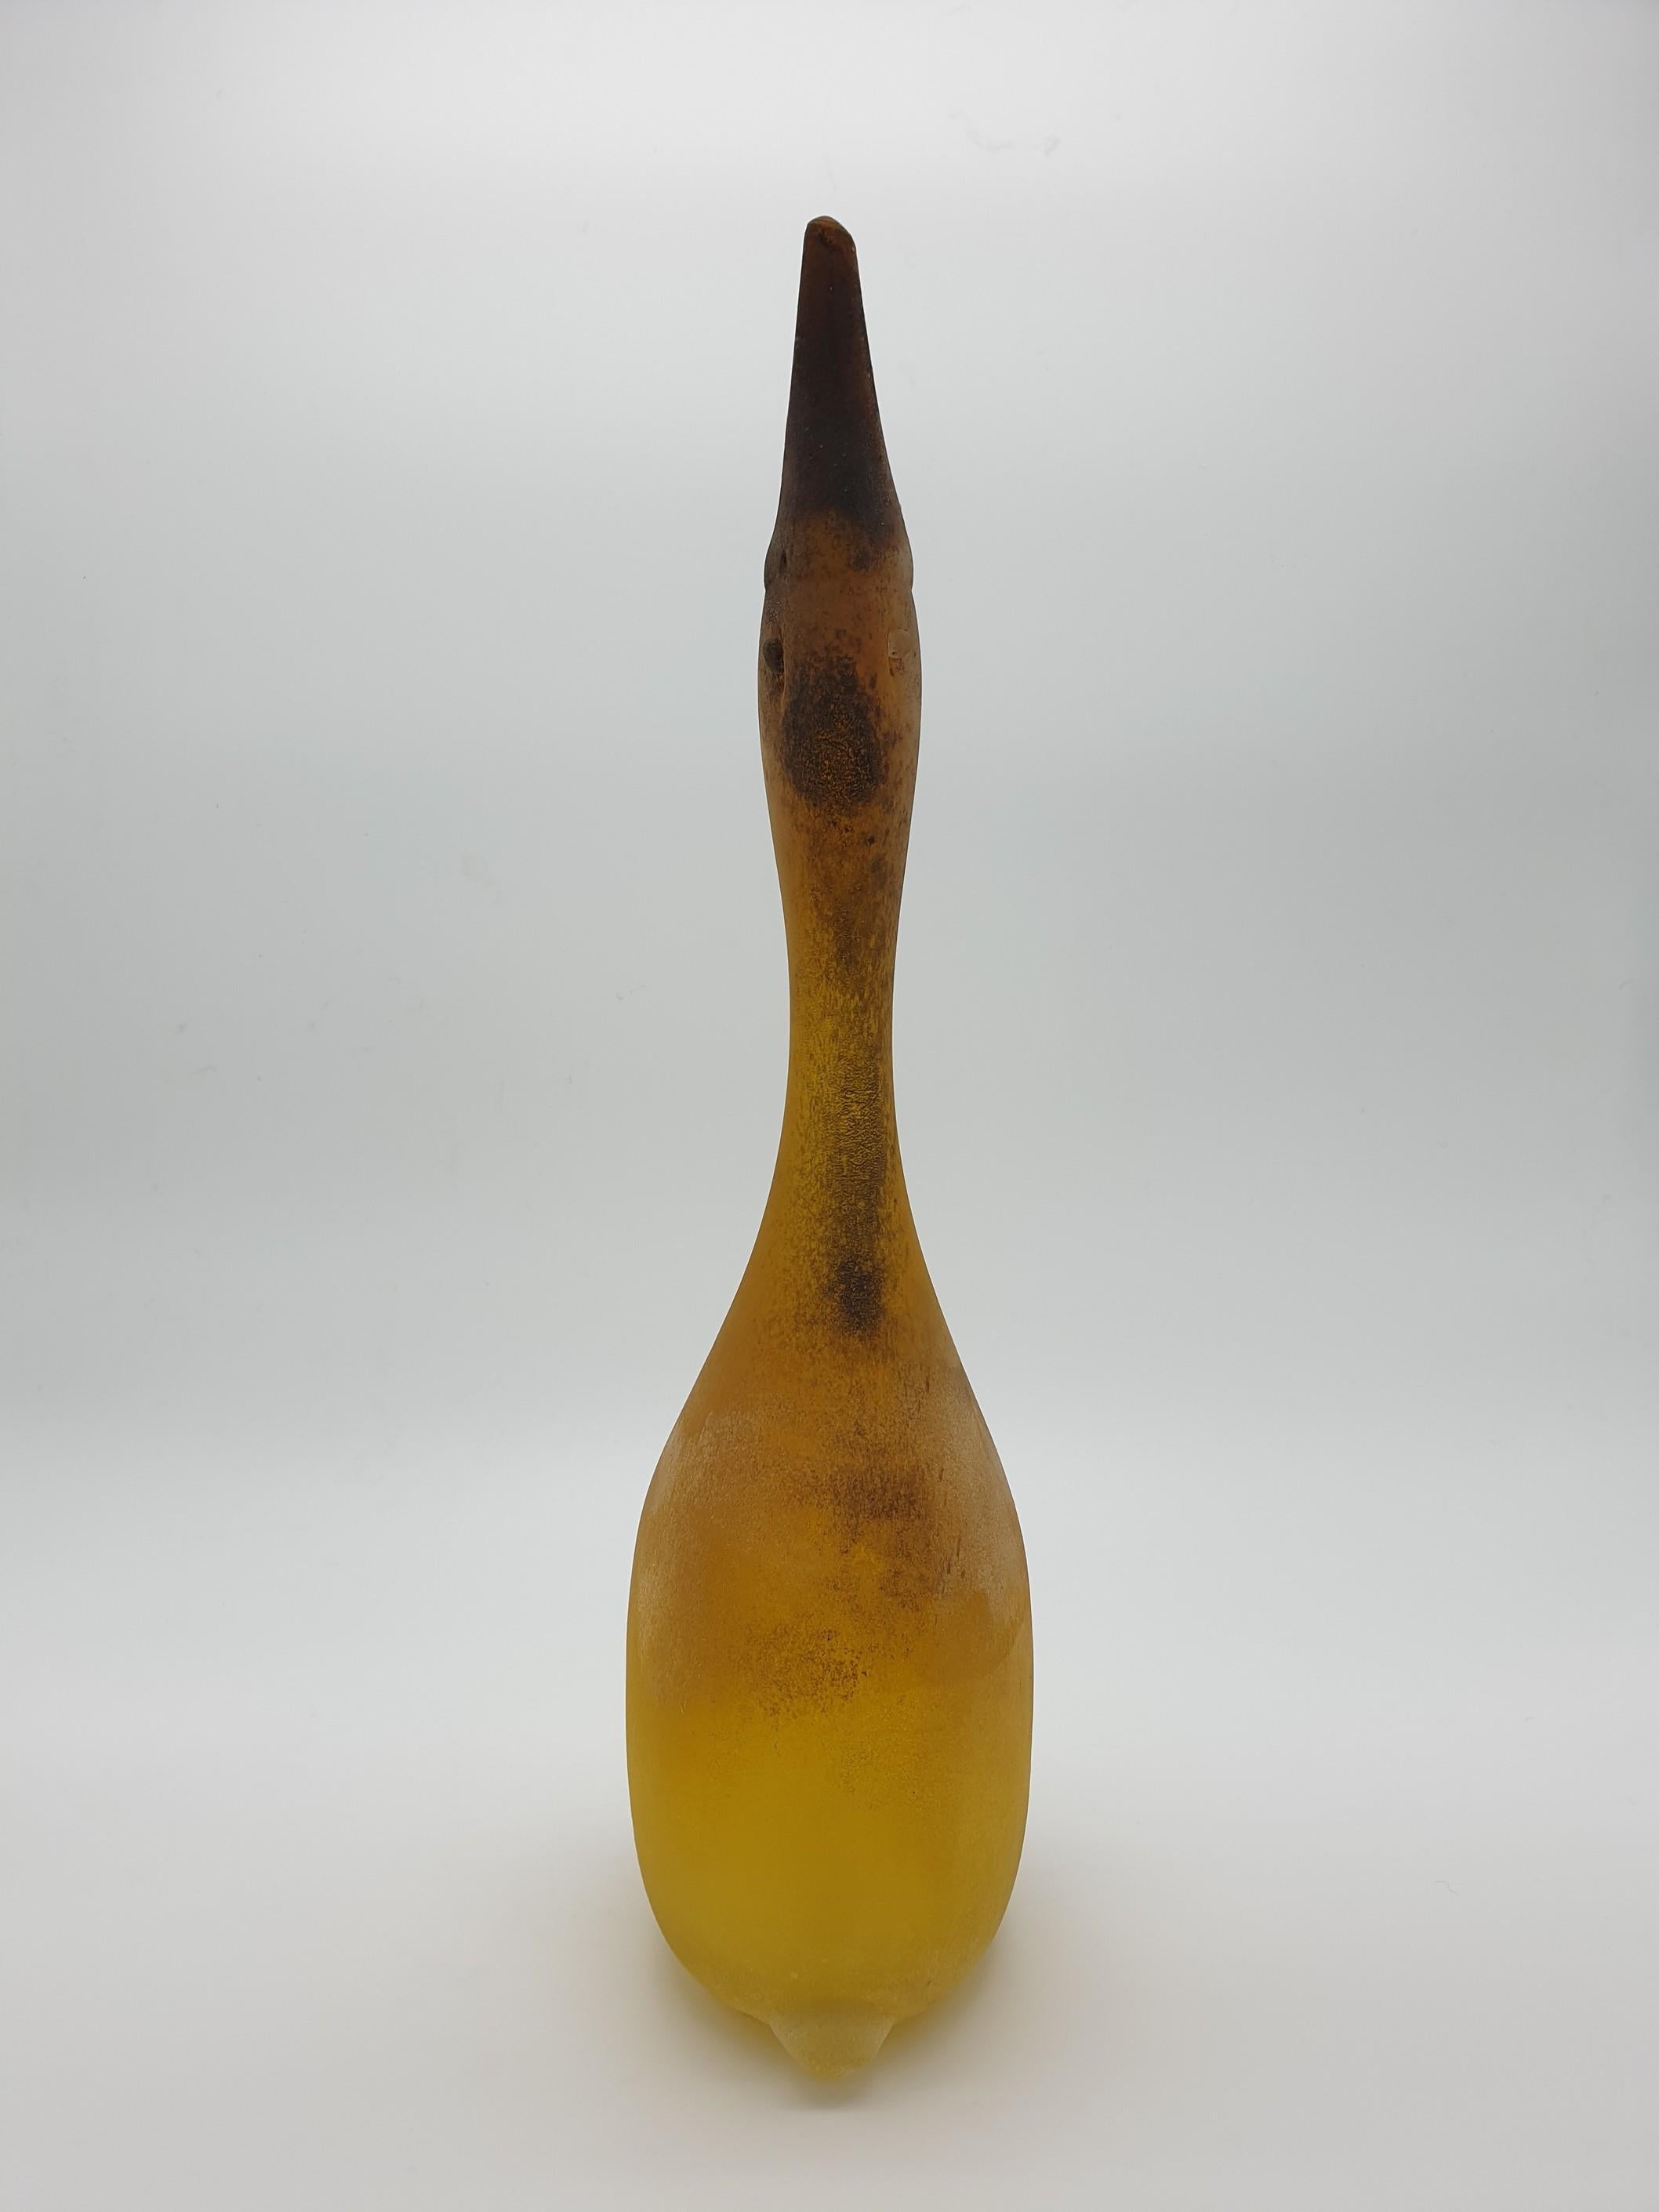 Modern Large Murano Glass Duck Vase by Antonio Da Ros at Gino Cenedese, 1960s For Sale 6